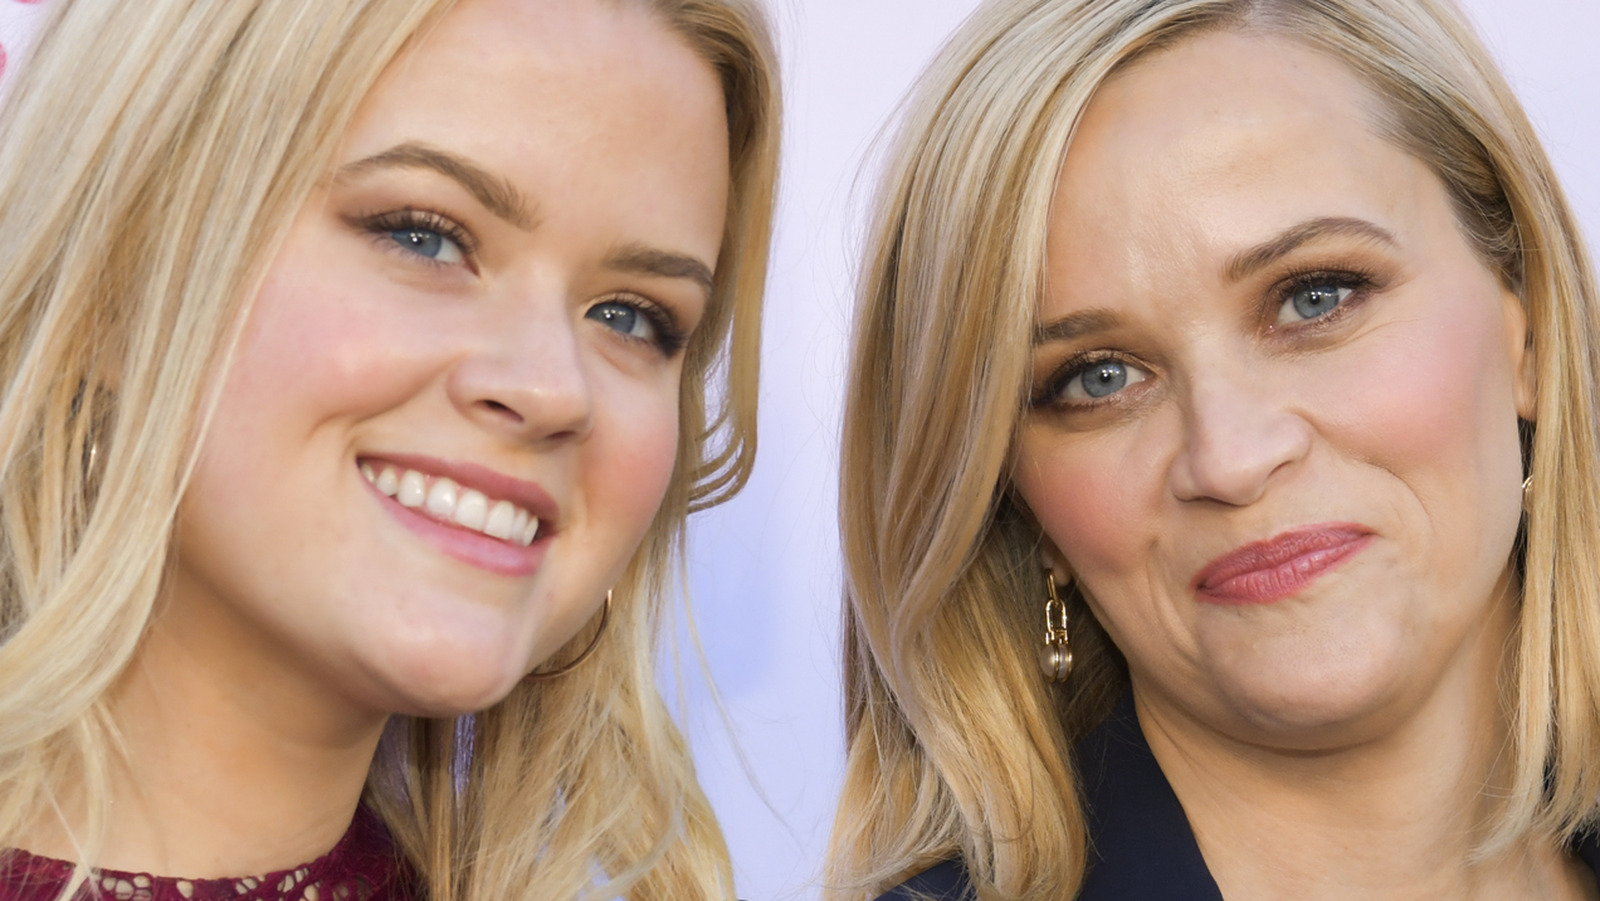 Red Flags That Signaled Reese Witherspoon And Jim Toths Marriage Troubles